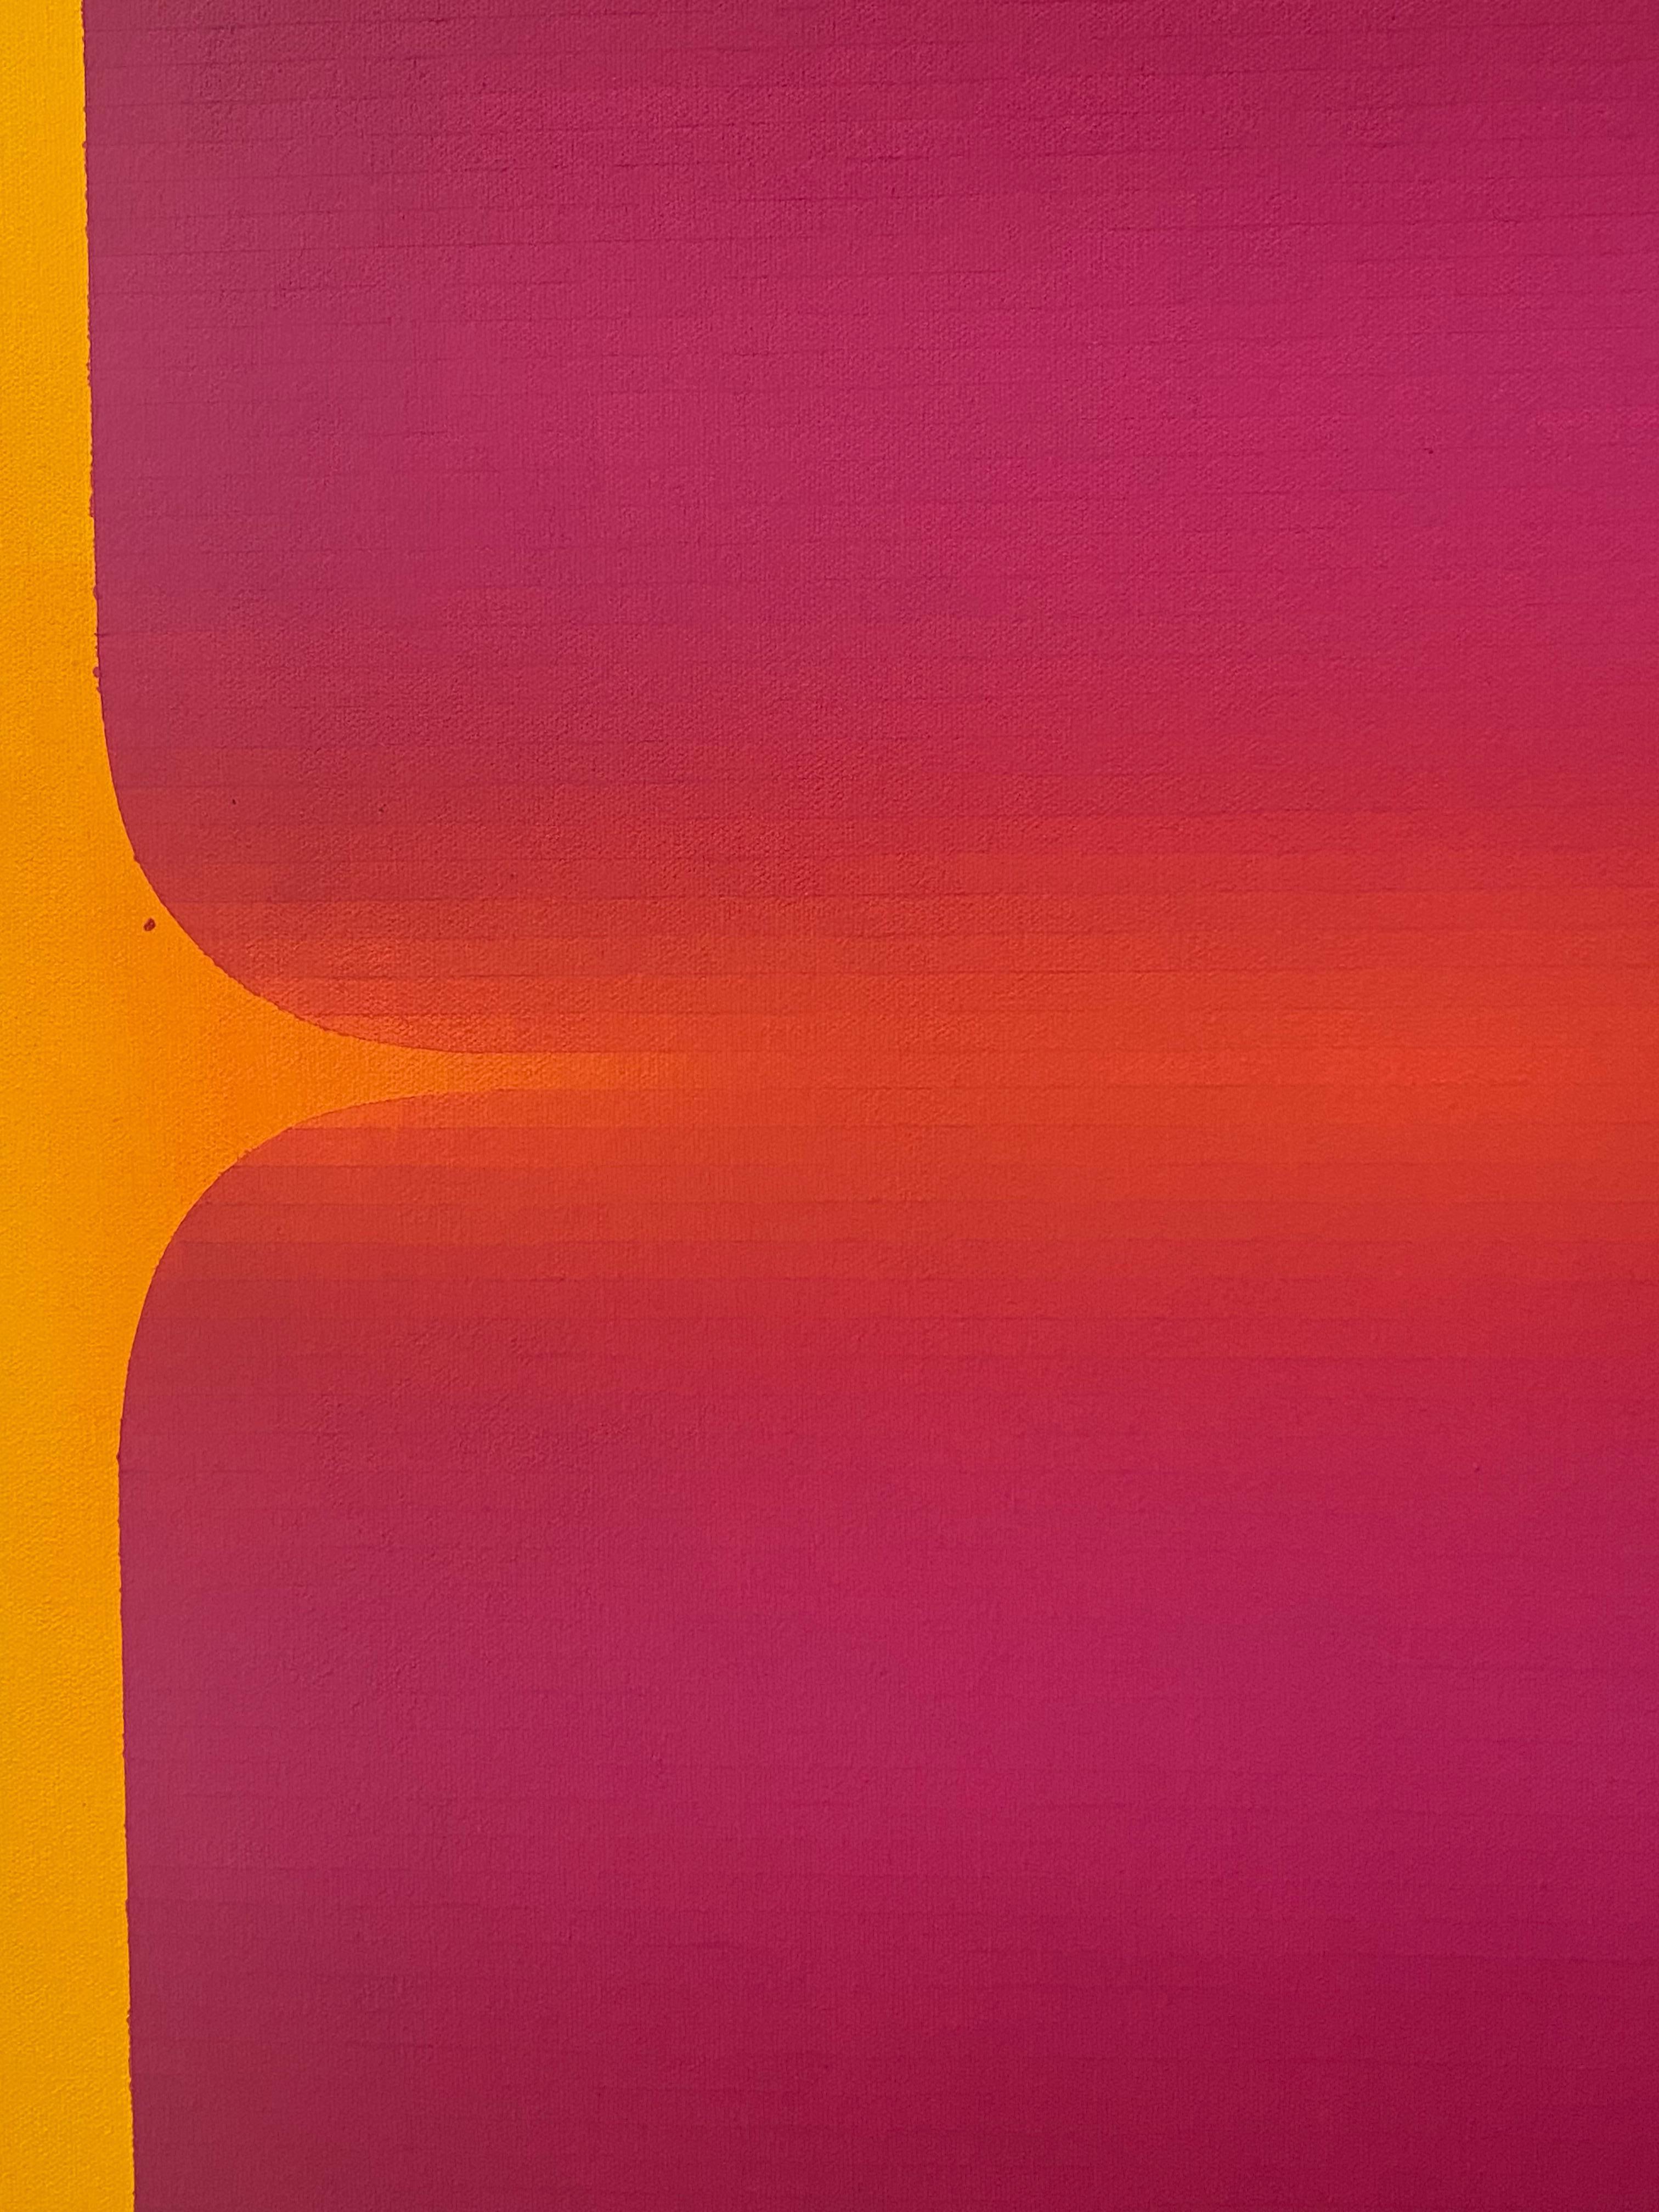 Rome Seven, Golden Yellow, Navy Blue, Indigo, Hot Pink, Orange Gradient Stripes - Contemporary Painting by Audrey Stone